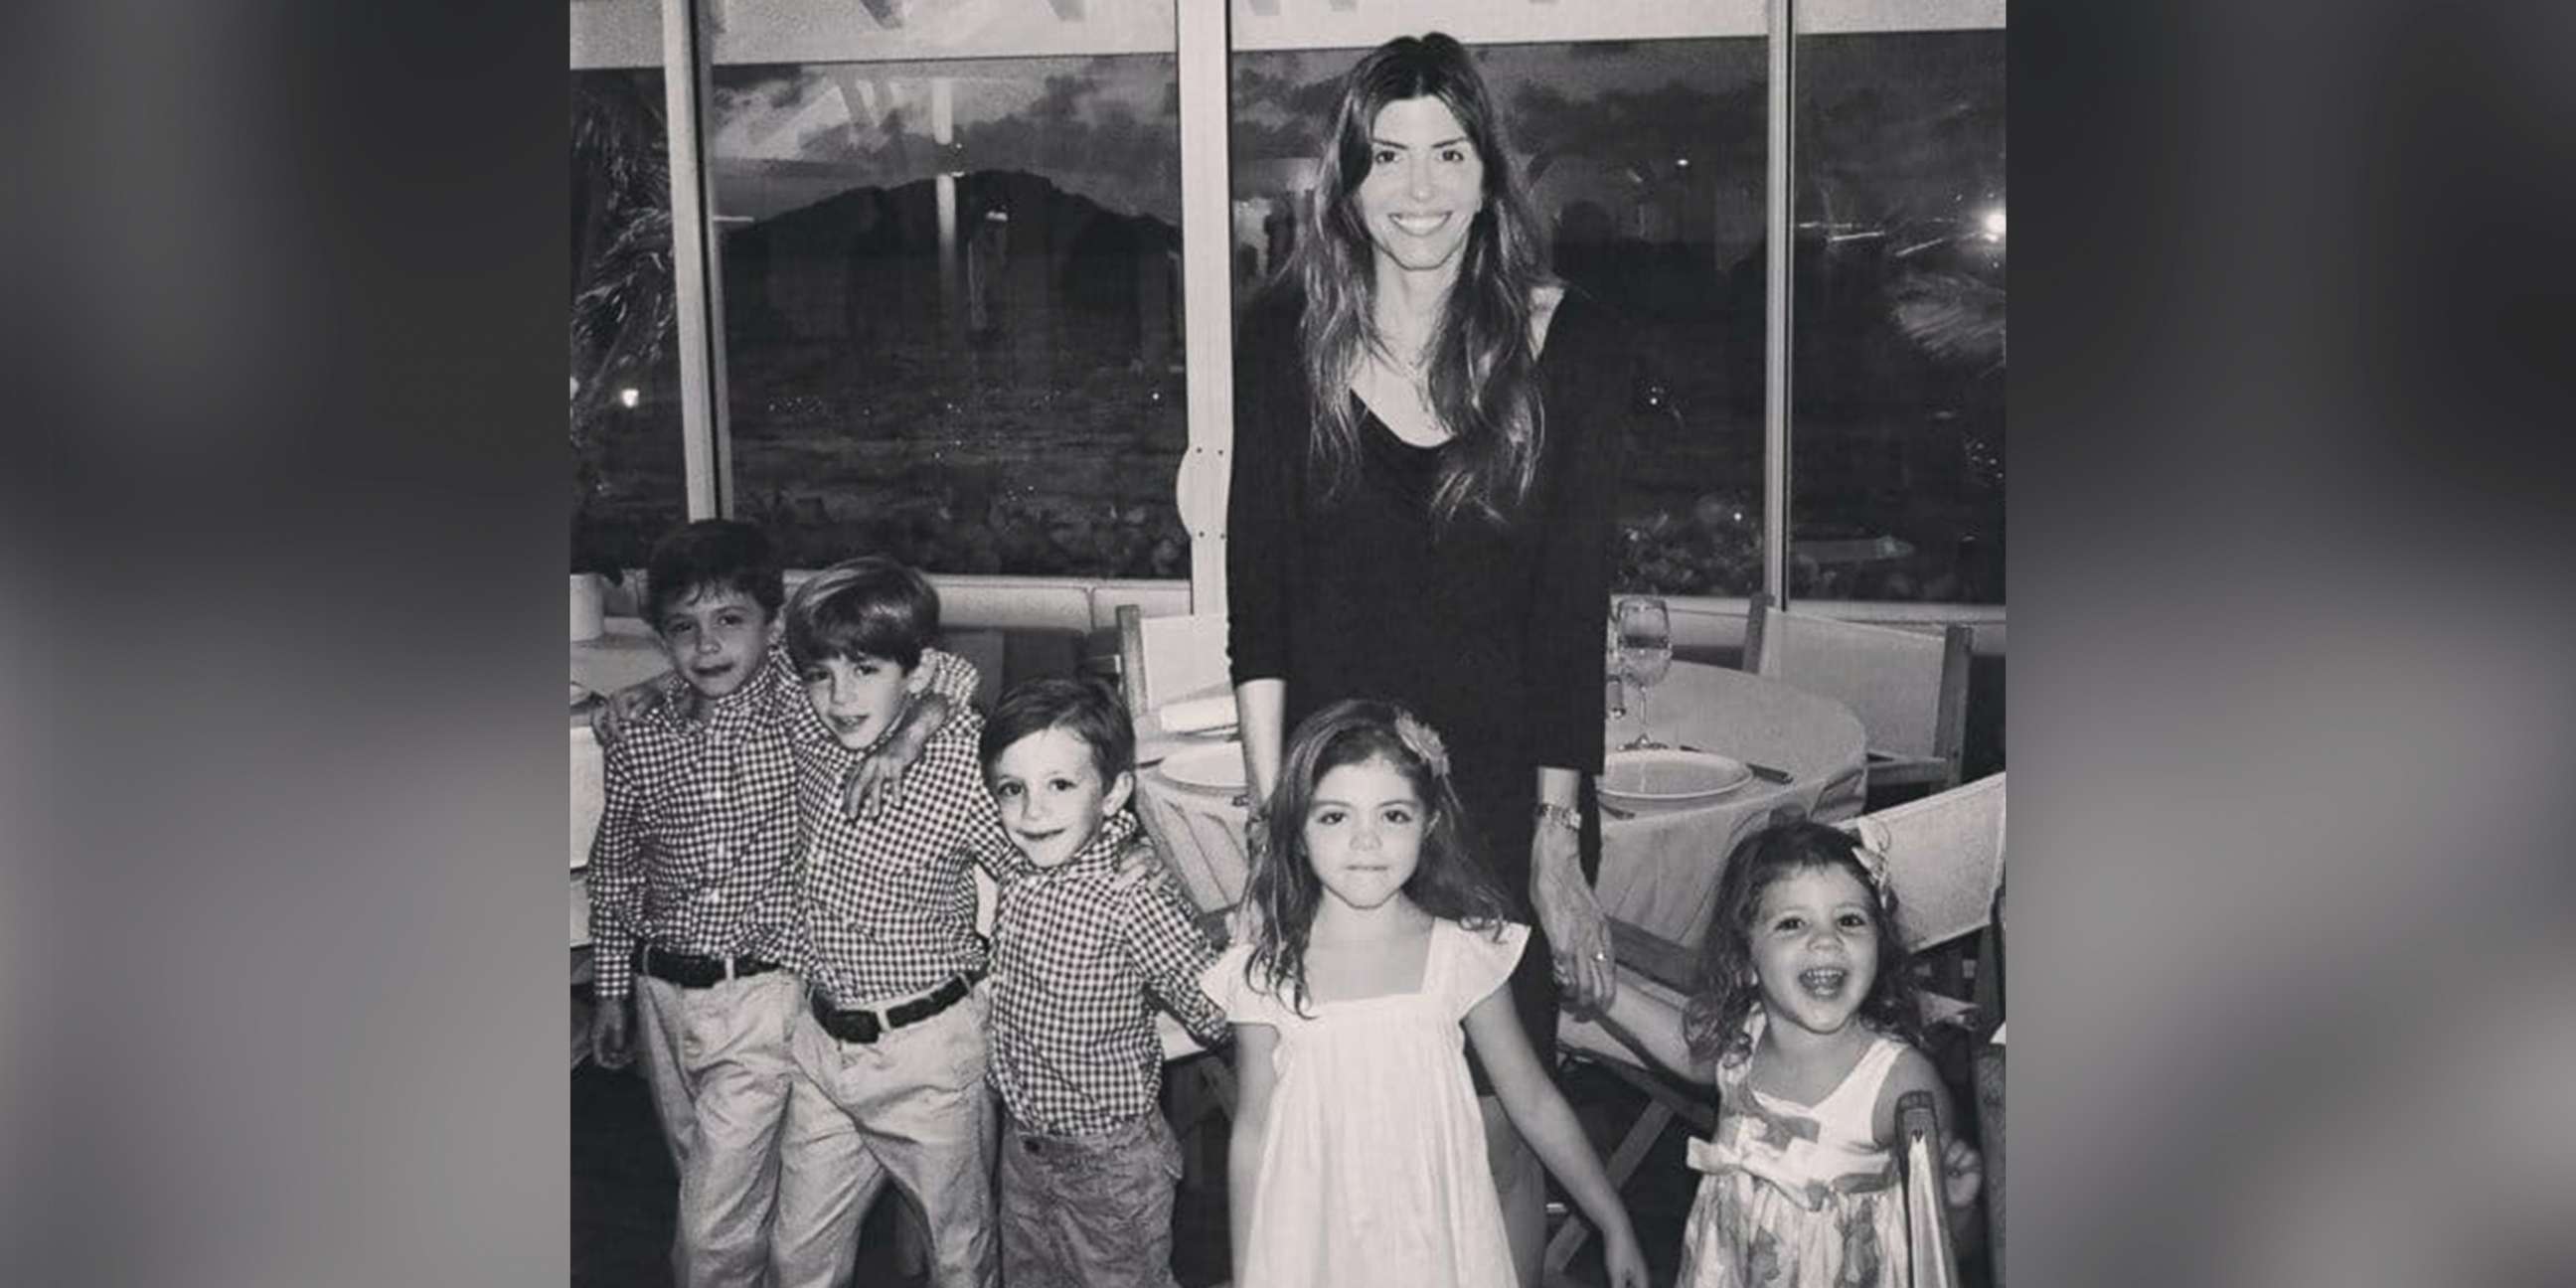 PHOTO: Jennifer Dulos, 50, of Connecticut, is pictured with her five children in an undated family photo.